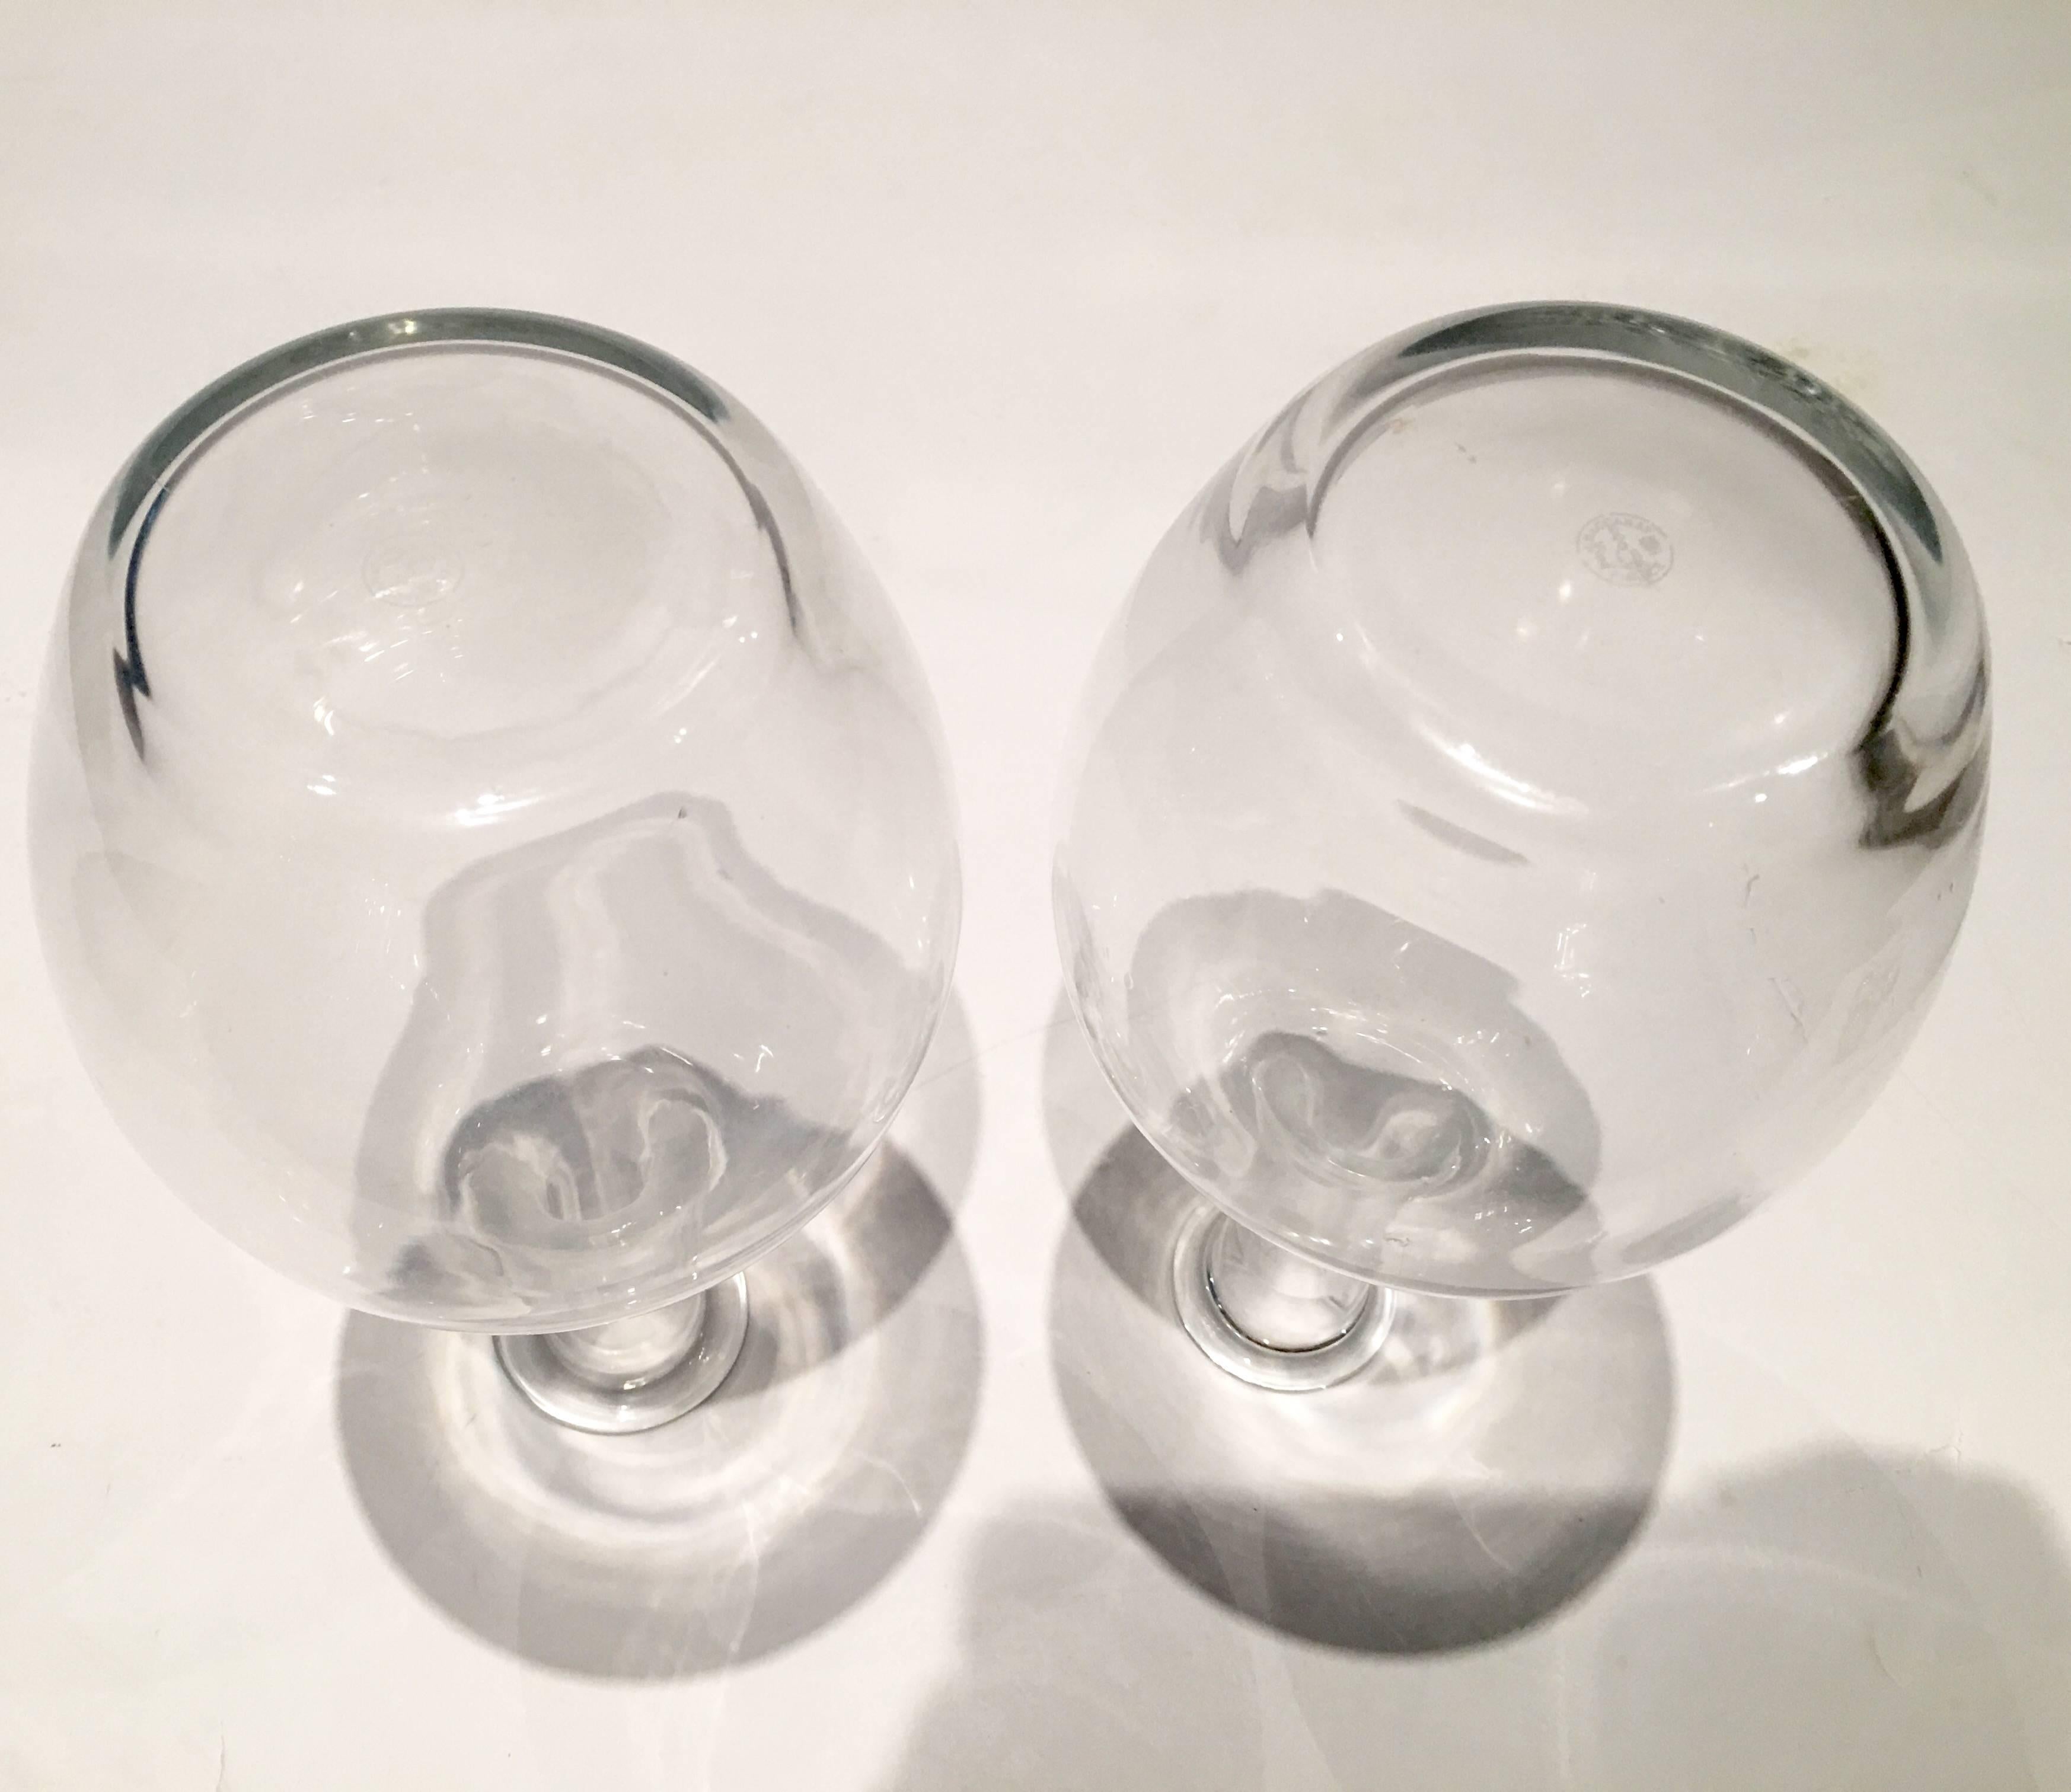 Pair of Baccarat France Crystal Decanters -